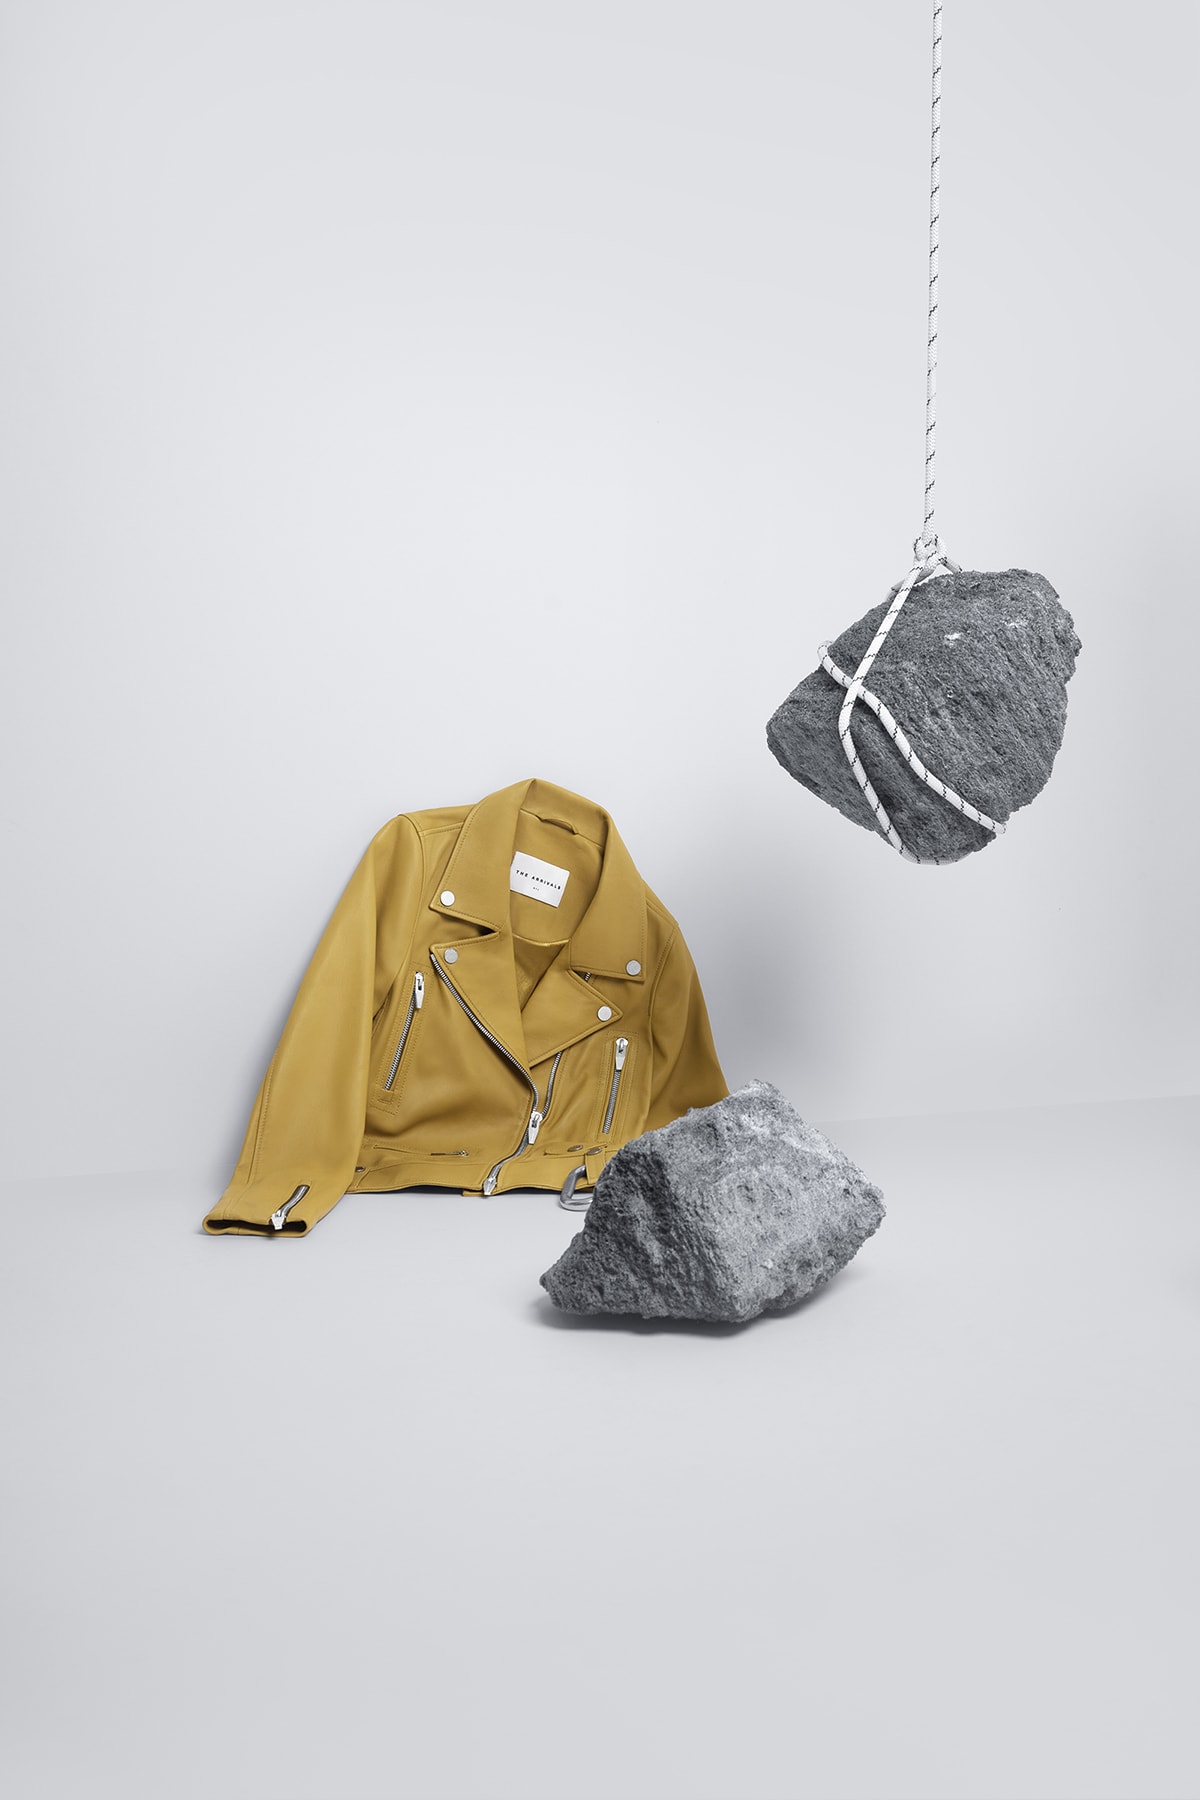 the arrivals mountain wear parkas bombers unisex tees leather jackets yellow